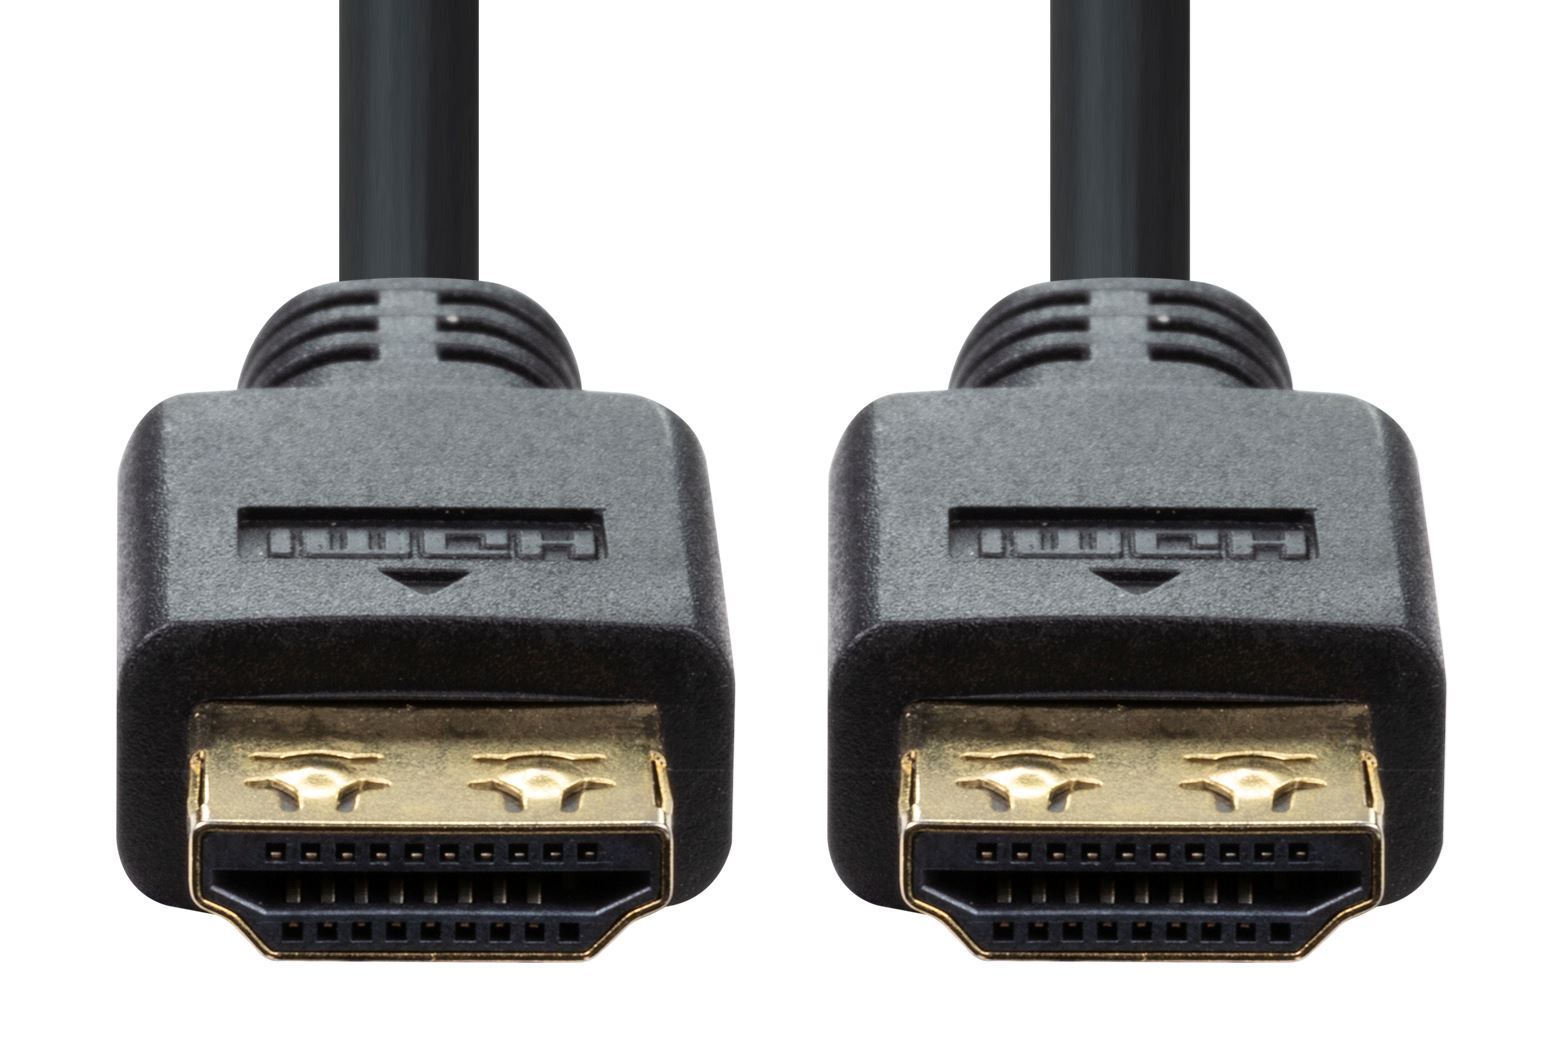 DYNAMIX_3m_HDMI_High_Speed_18Gbps_Flexi_Lock_Cable_with_Ethernet._Max_Res:_4K2K@30/60Hz._32_Audio_channels._10/12bit_colour_depth._Supports_CEC_2.0,_3D,_ARC,_Ethernet_2x_simultaneous_video_streams. 736